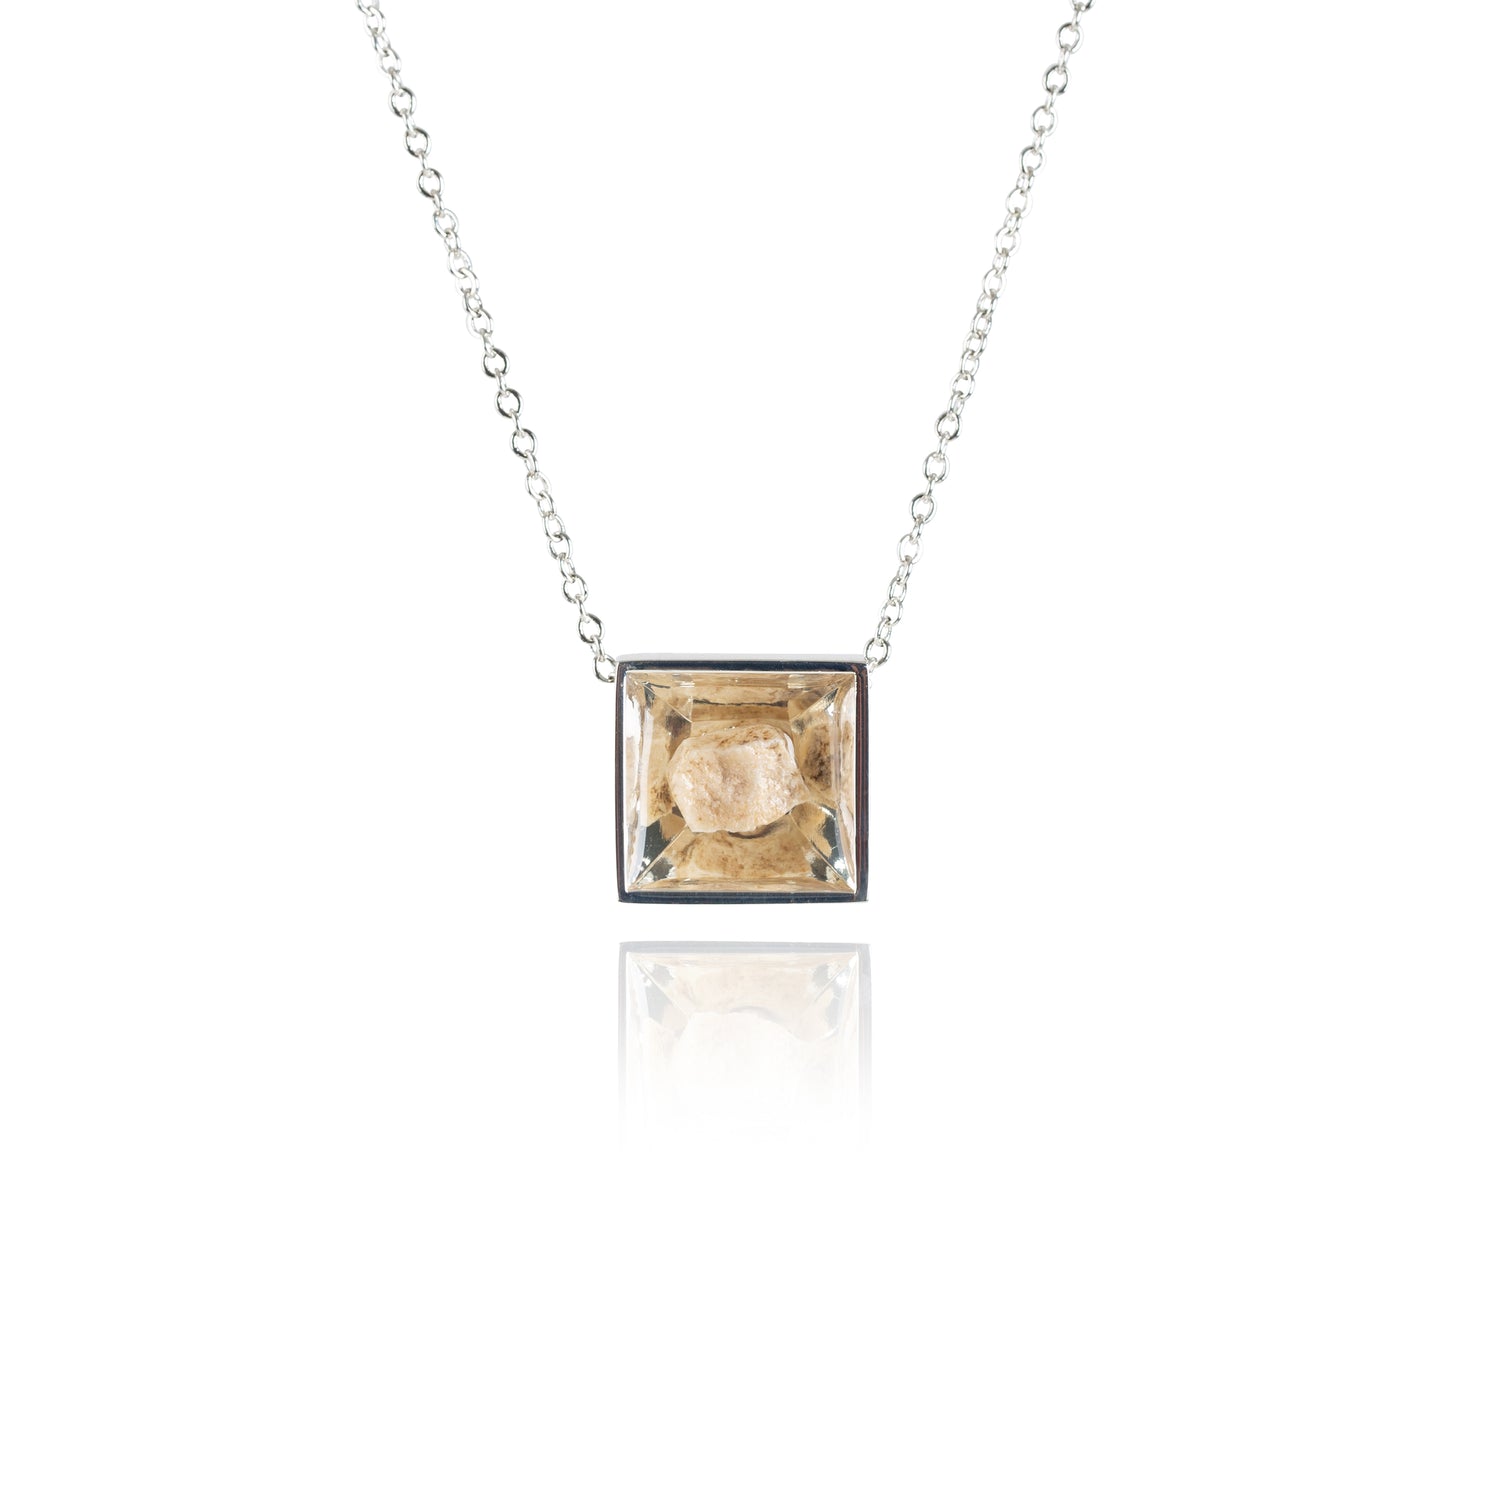 A small natural tan stone sitting in the middle of a square shaped metal pendant in a silver color. The pendant is hanging on a silver chain.